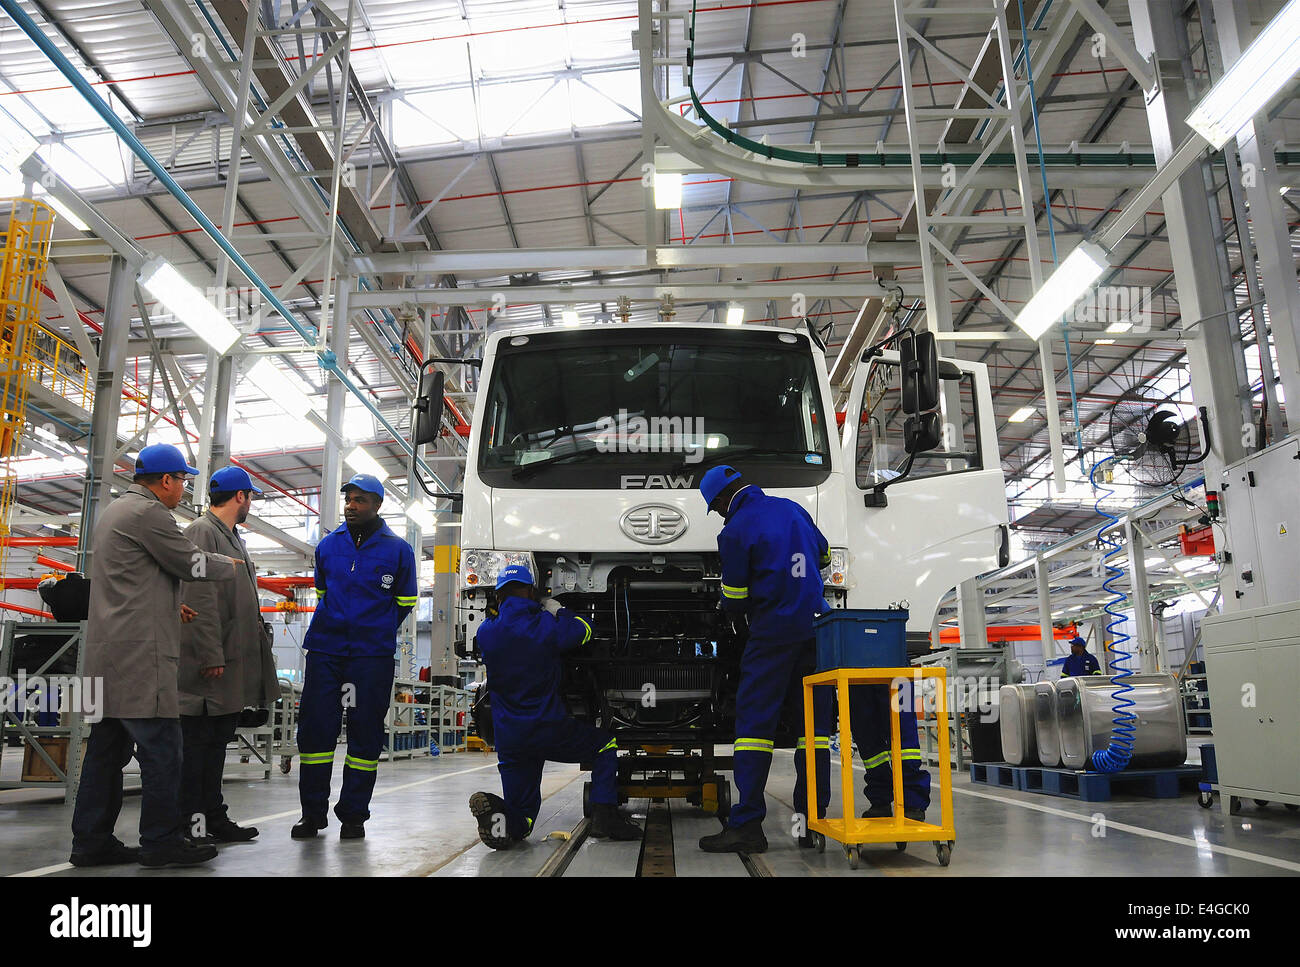 Nelson Mandela, South Africa. 10th July, 2014. Chinese technical personnel and local workers work in new assembly production plant of China First Automotive Works (FAW) Group Corporation in Nelson Mandela Bay Municipality, South Africa, July 10, 2014. China FAW Group Corporation launched its new assembly production plant in COEGA Industrial Development Zone (IDZ) in the Nelson Mandela Bay Municipality on Thursday. The plant, with an investment of 57 million dollars will initially assemble 5,000 trucks annually for the Sub-Saharan African market. © Zhang Chuanshi/Xinhua/Alamy Live News Stock Photo